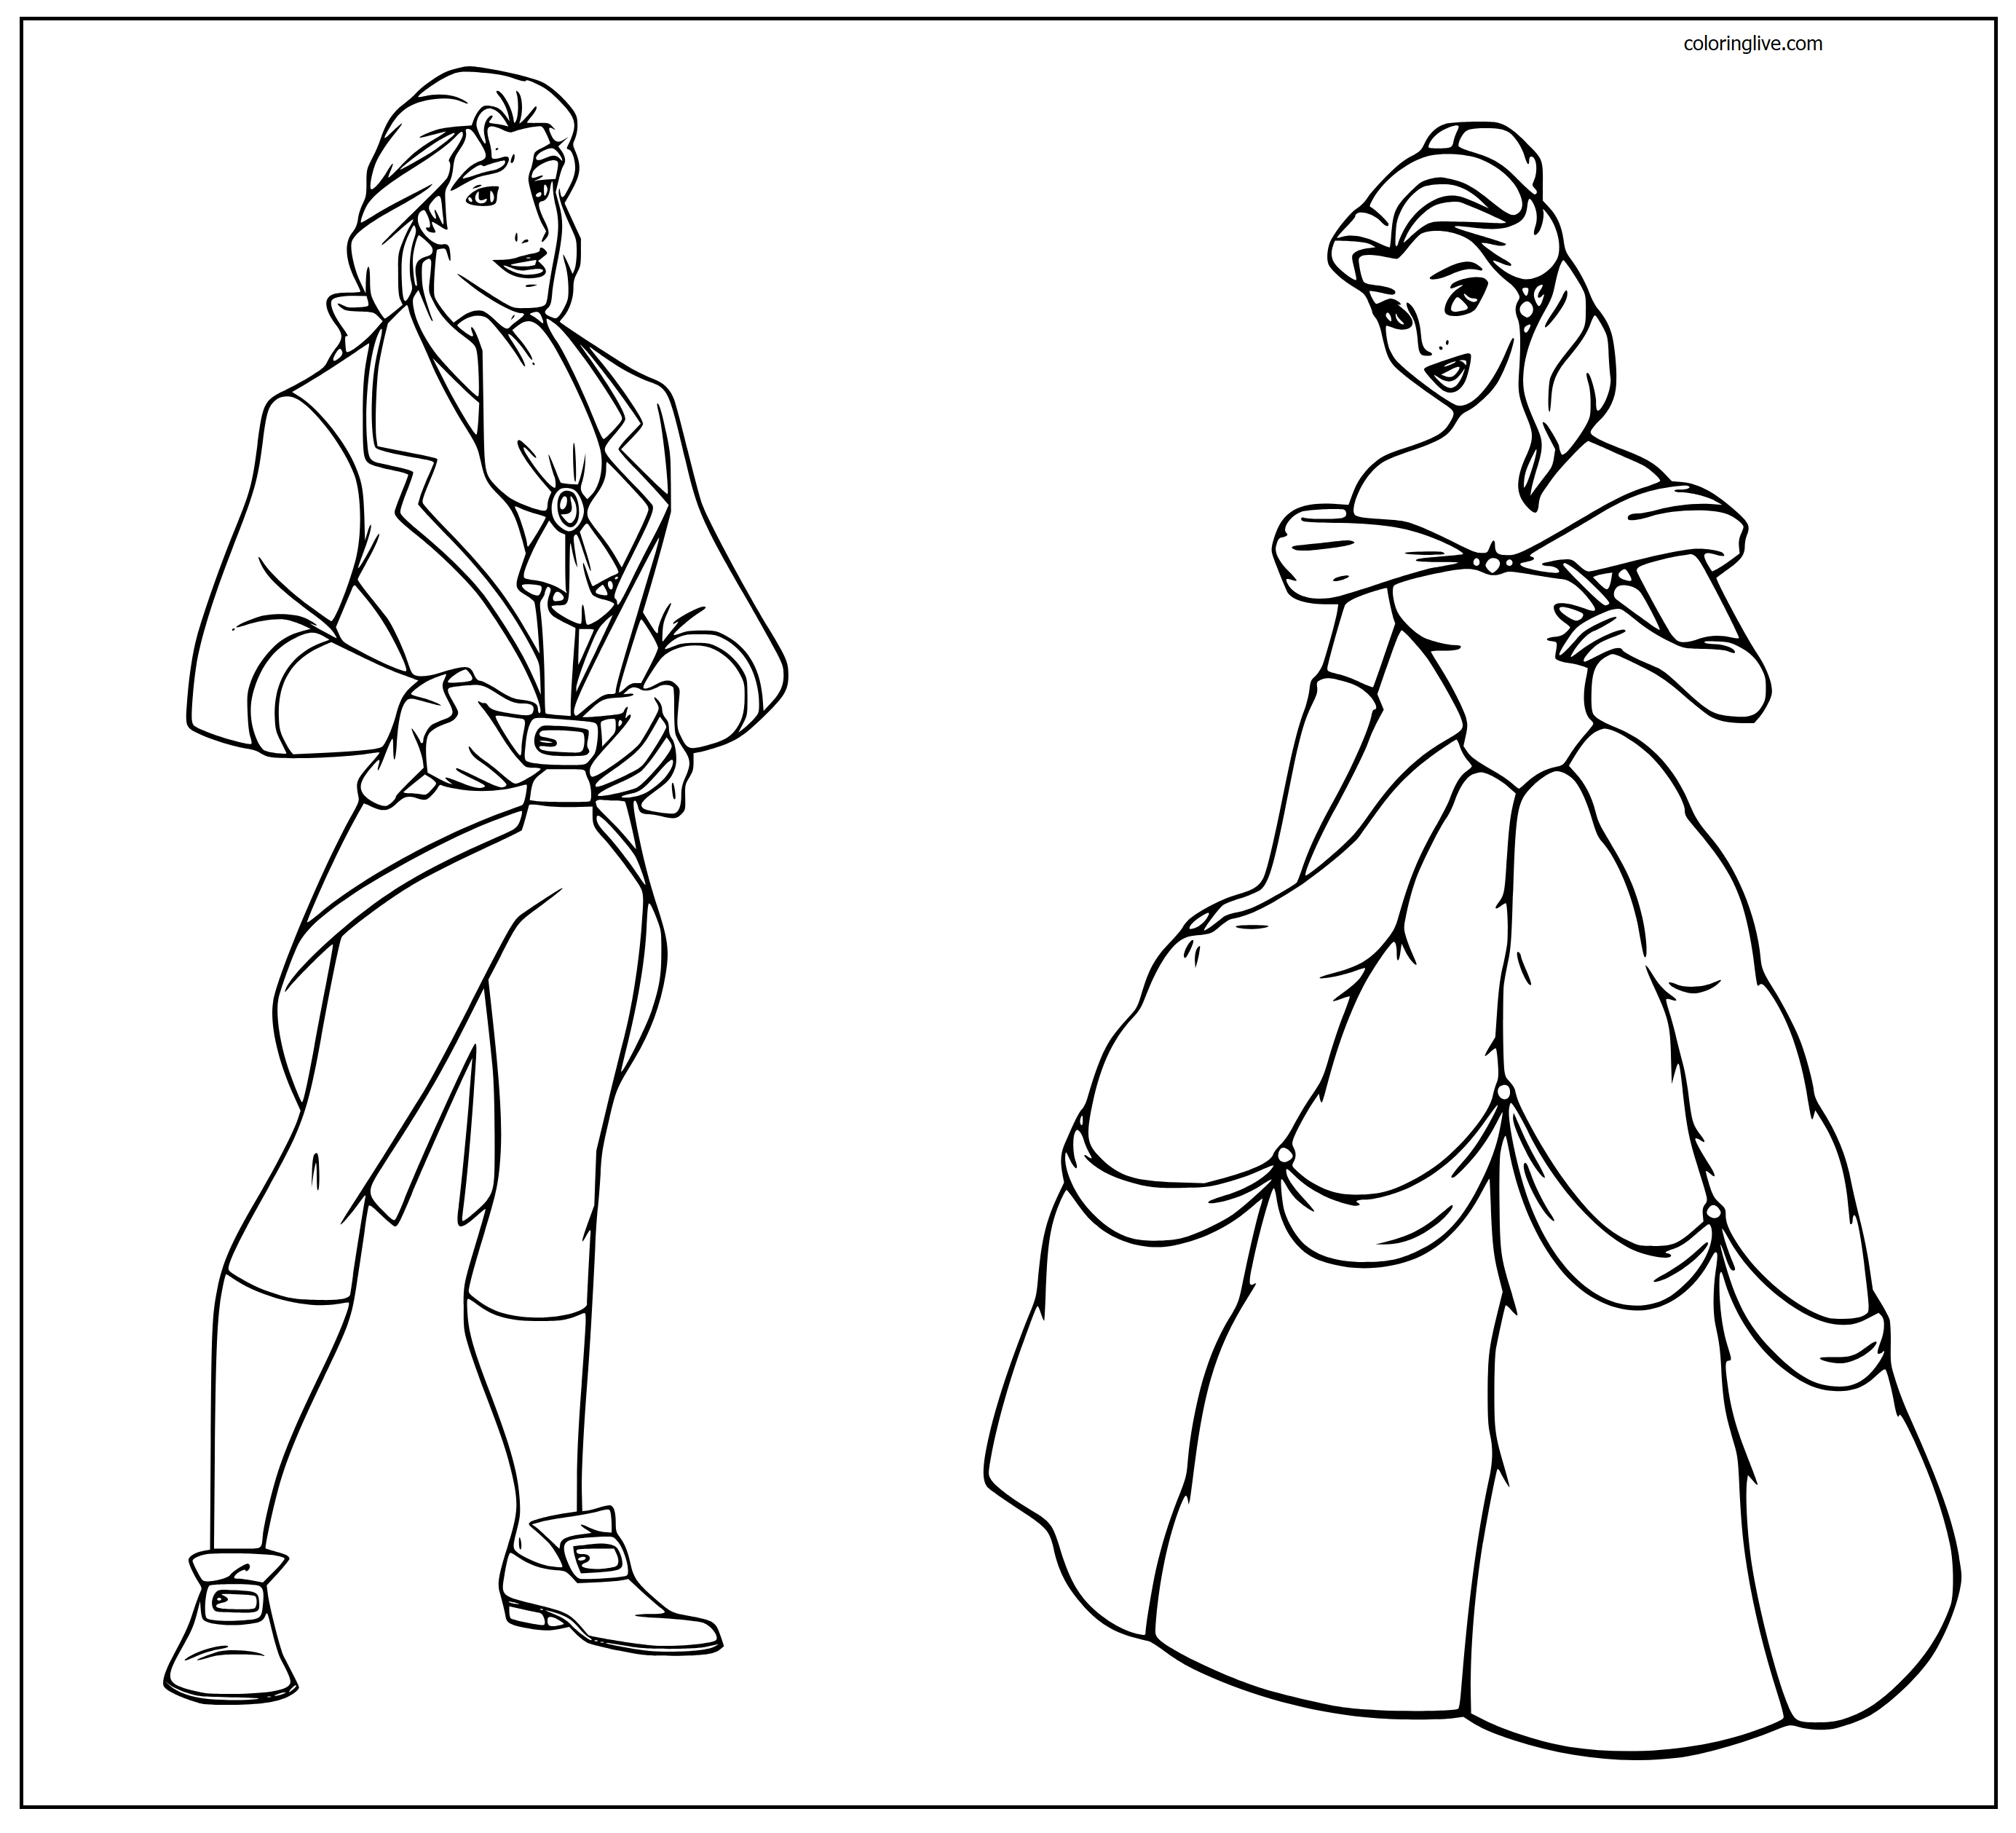 Printable Beast turns into a handsome prince and princess belle Coloring Page for kids.